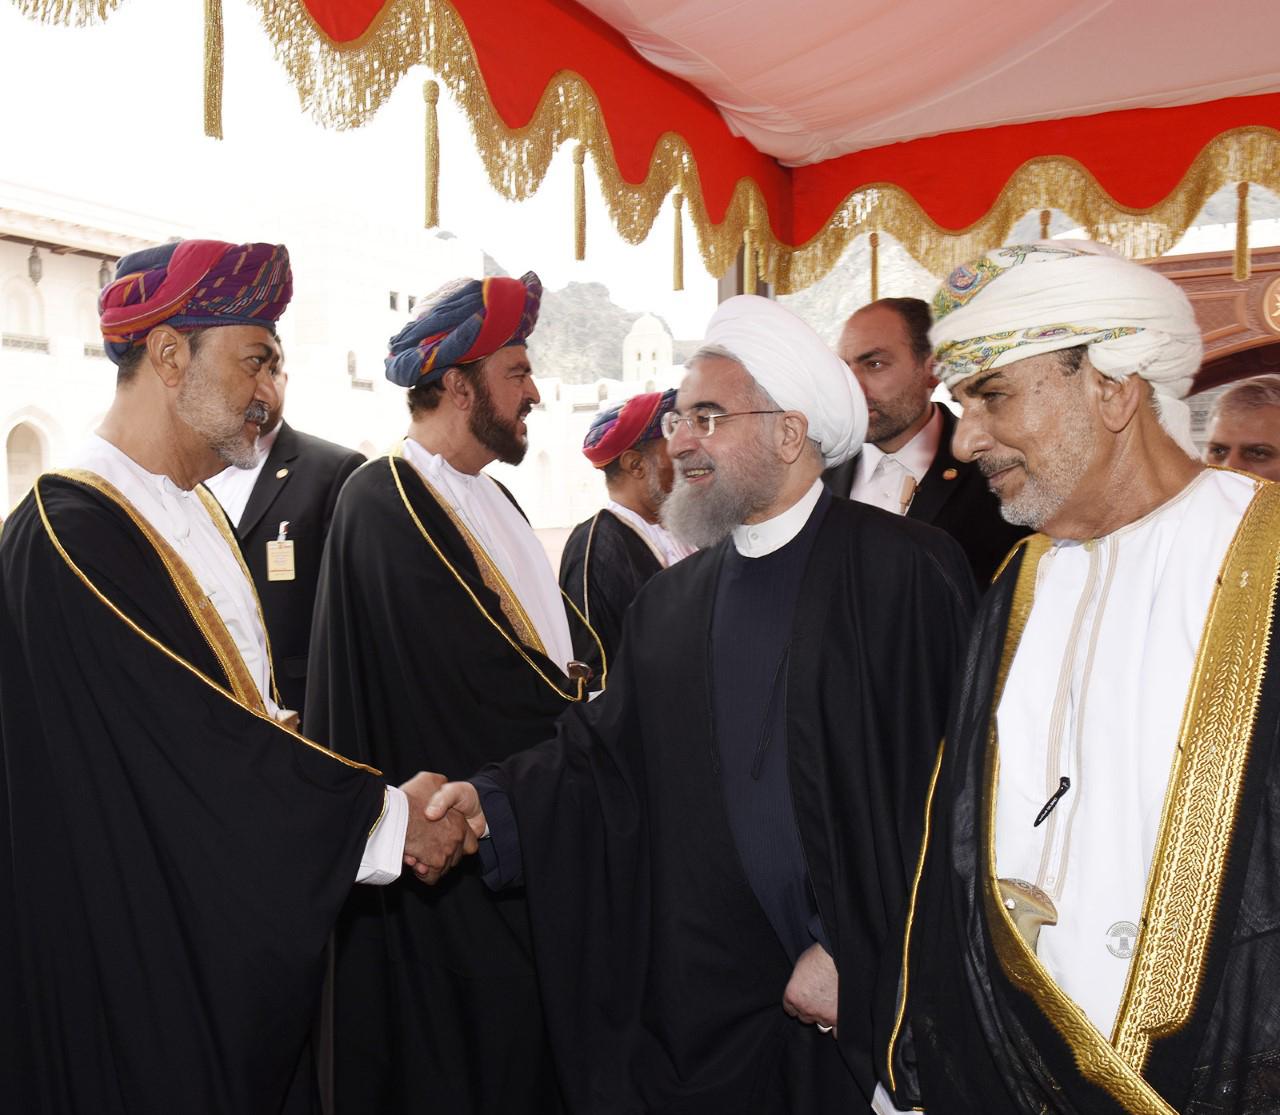 In pictures: Iranian President Hassan Rouhani visits Oman